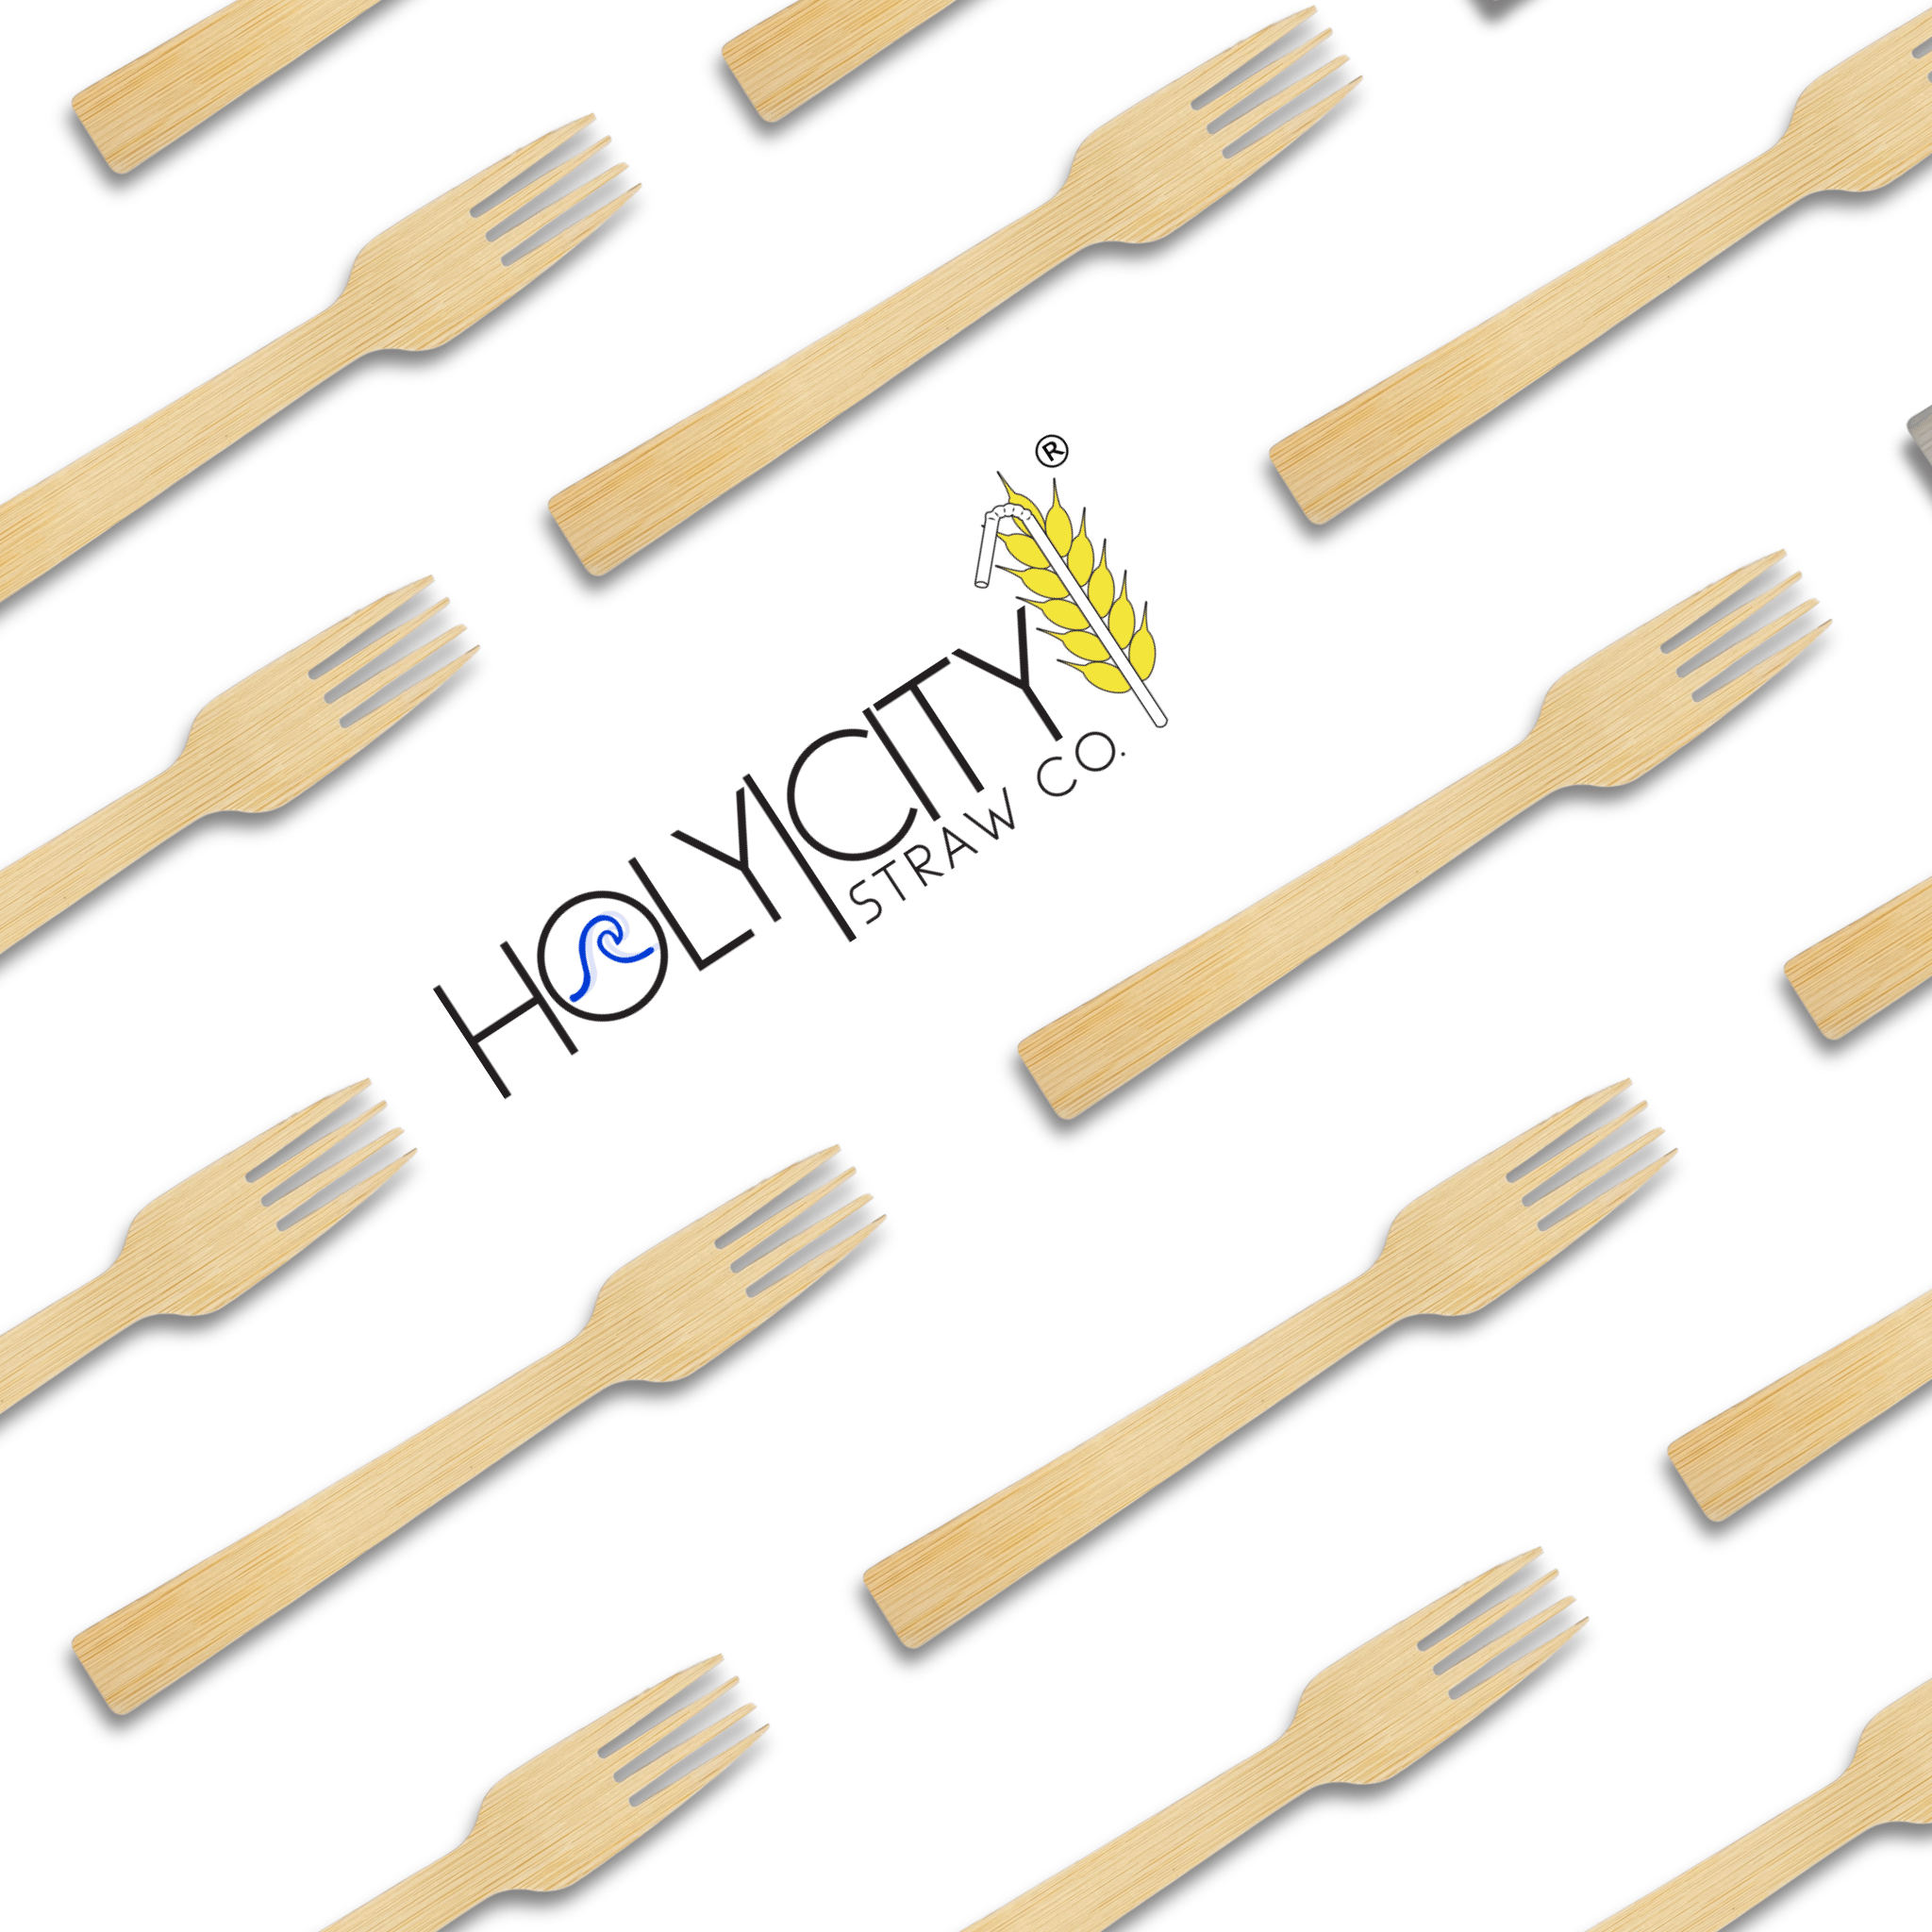 Pattern of unwrapped bamboo forks arranged neatly, with Holy City Straw Co. logo in the center.